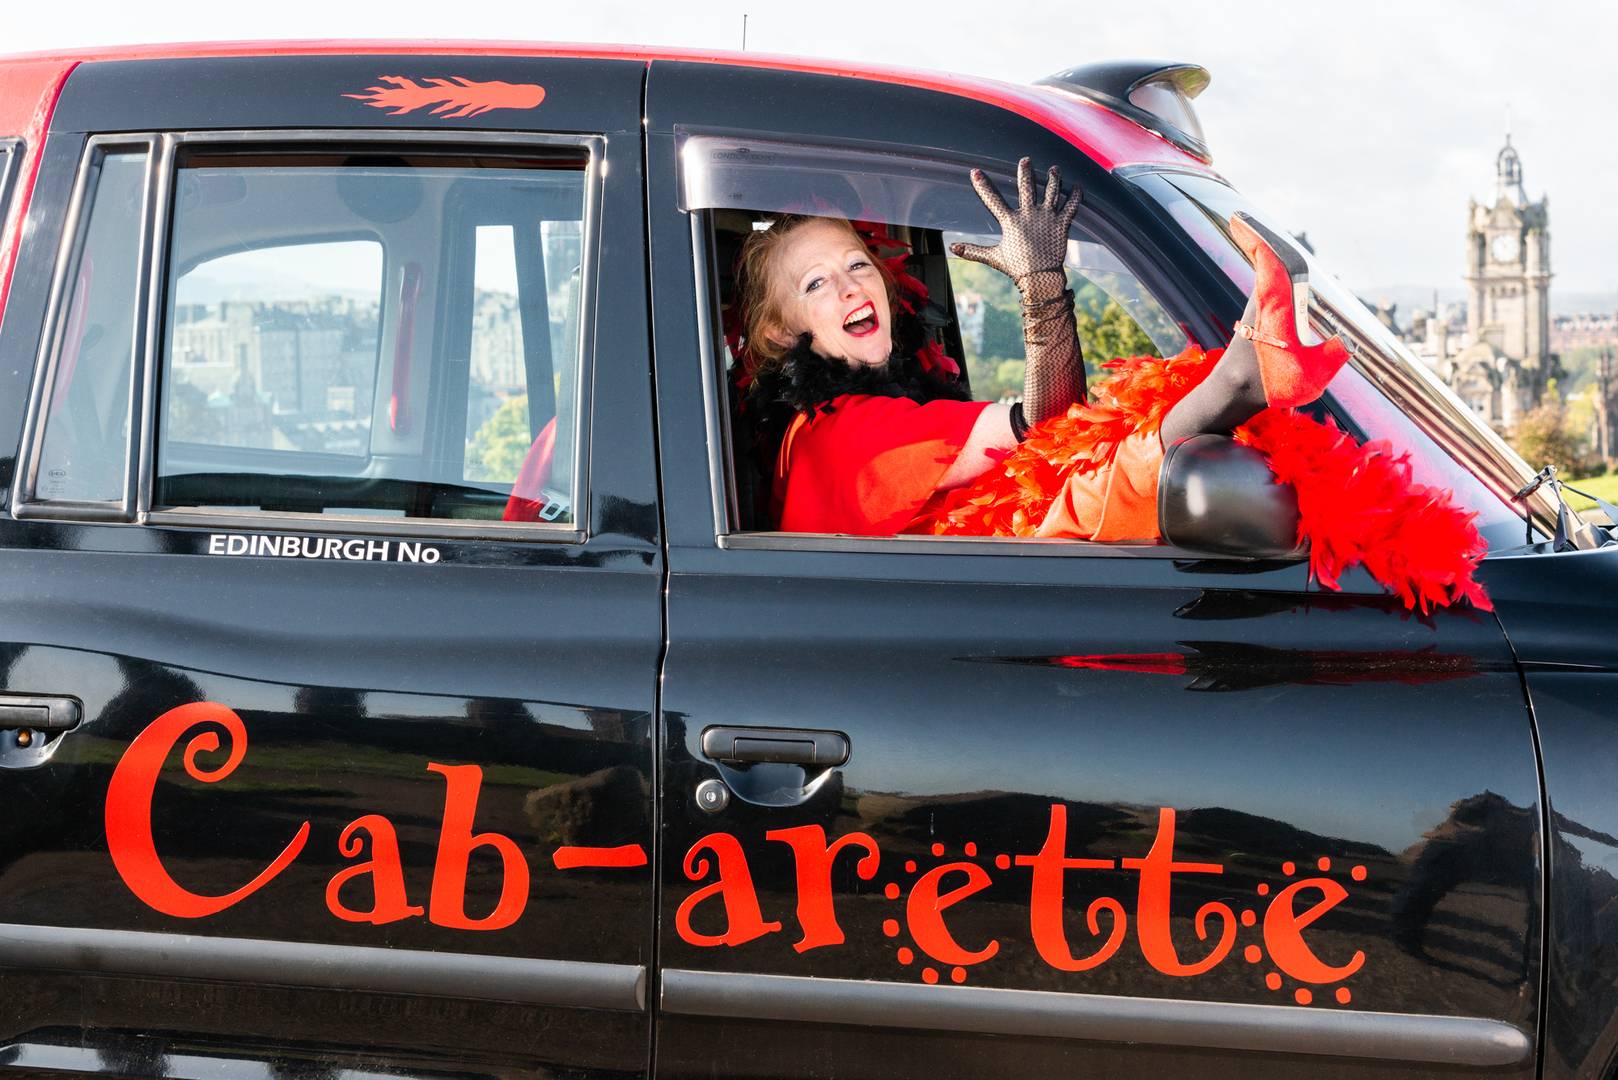 Lola in full swing. Dressed in red feathered and with a leg out the drivers window of the cabaret cab, atop Calton hill,© Kristof Turi